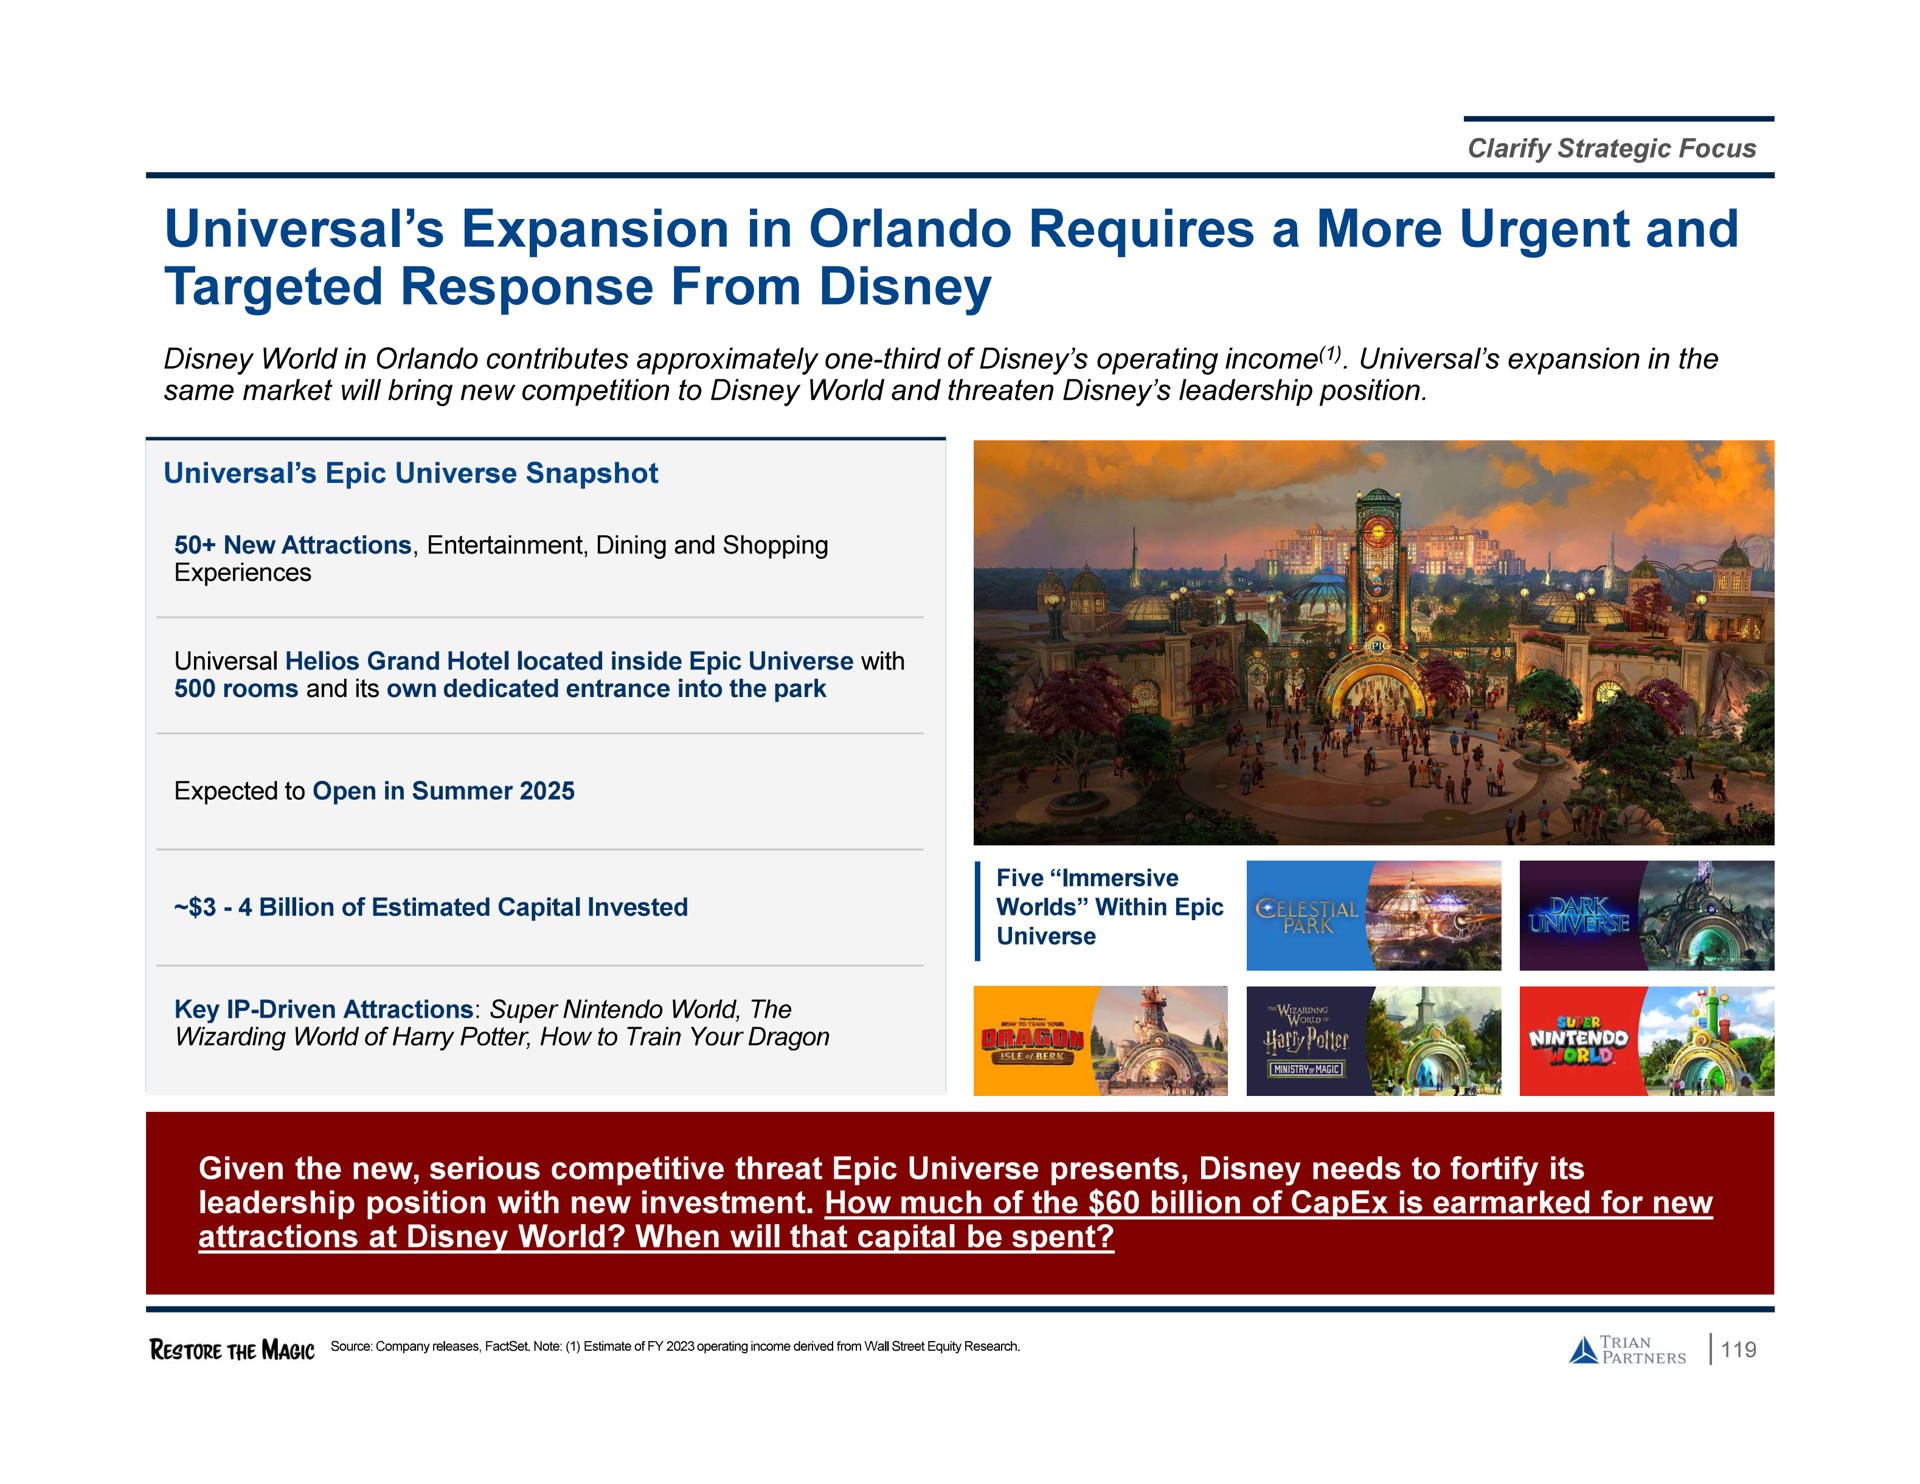 universal expansion in requires a more urgent and targeted response from | Trian Partners